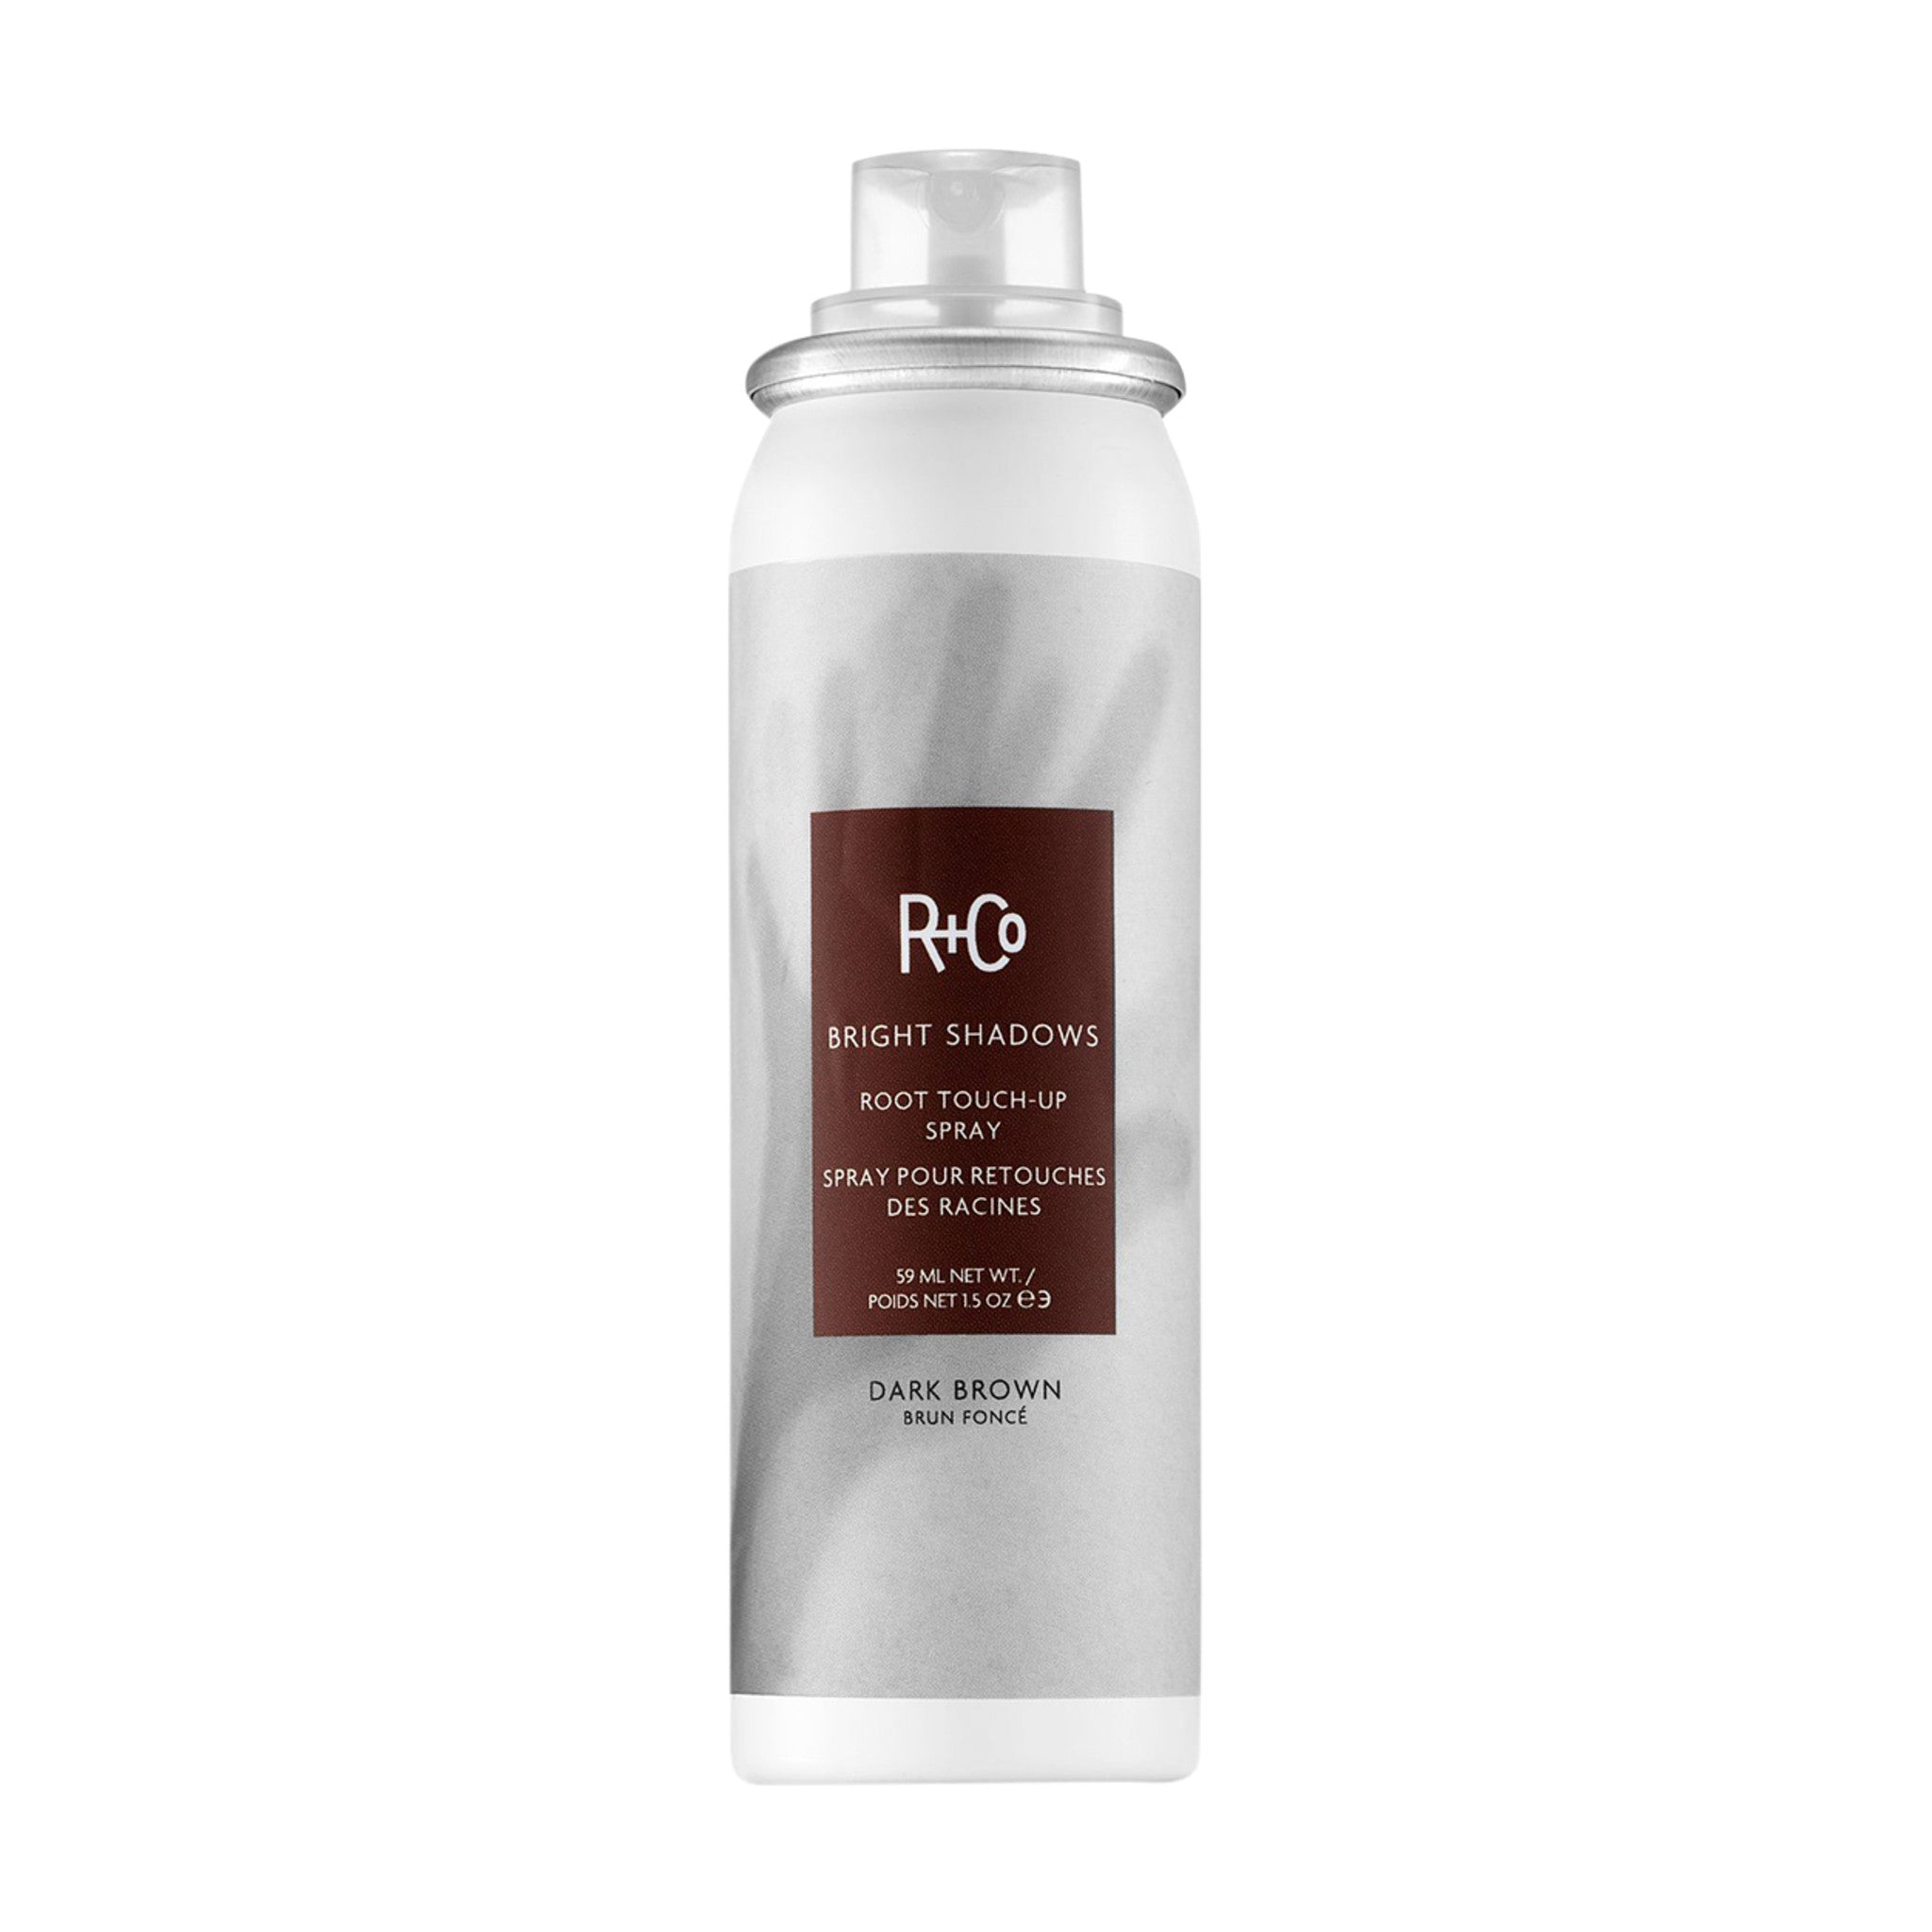 R+Co Bright Shadows Root Touch Up Spray Dark Brown main image. This product is for brown hair